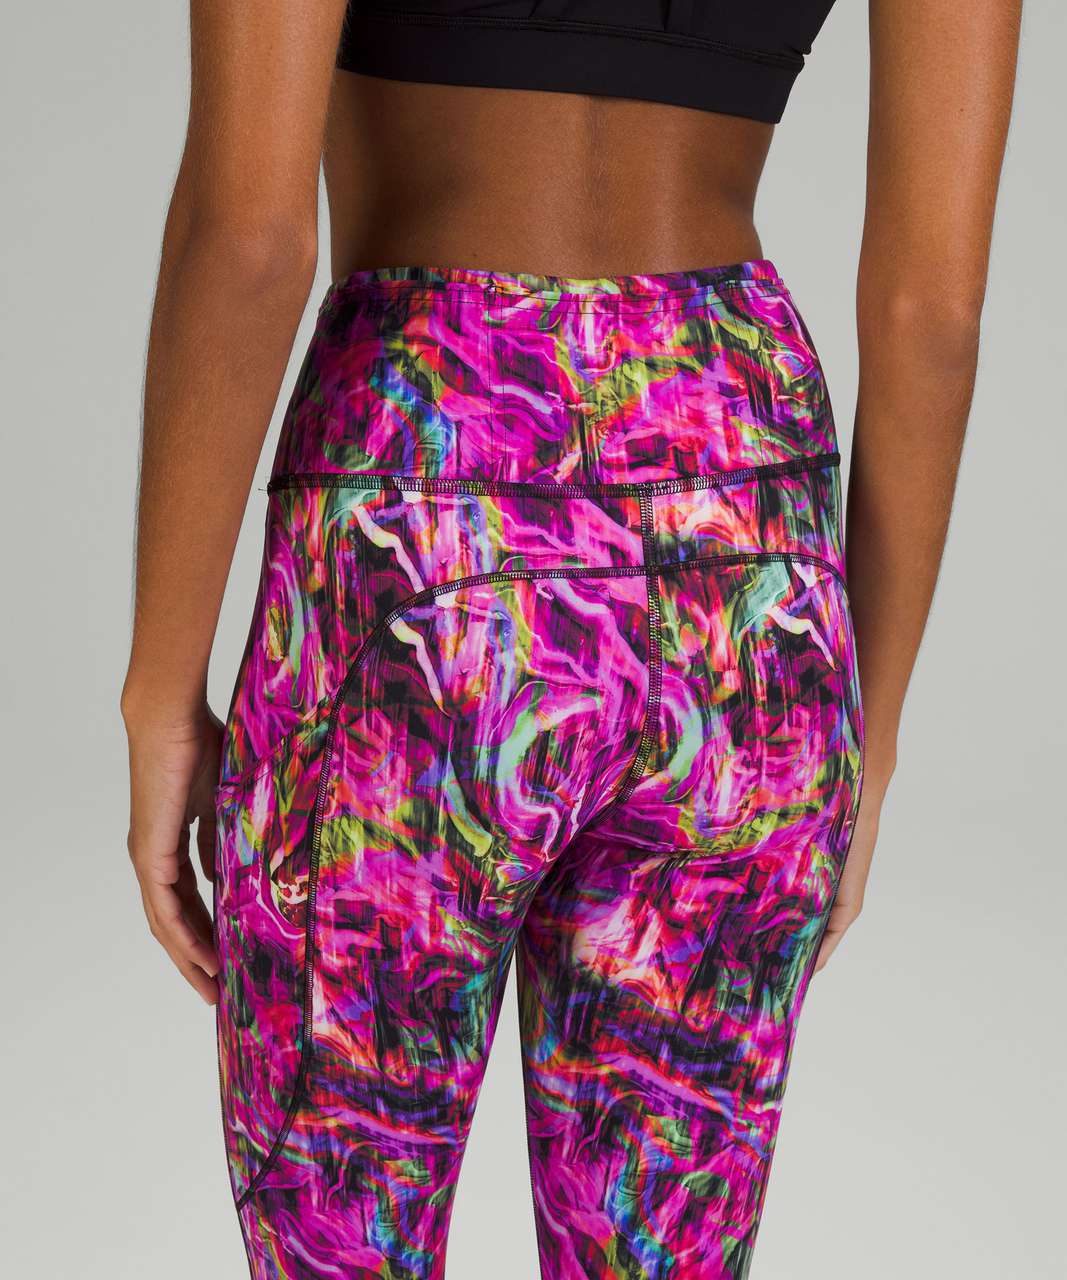 Lululemon Fast and Free High-Rise Tight 25" *Nulux - Hyper Flow Pink Multi